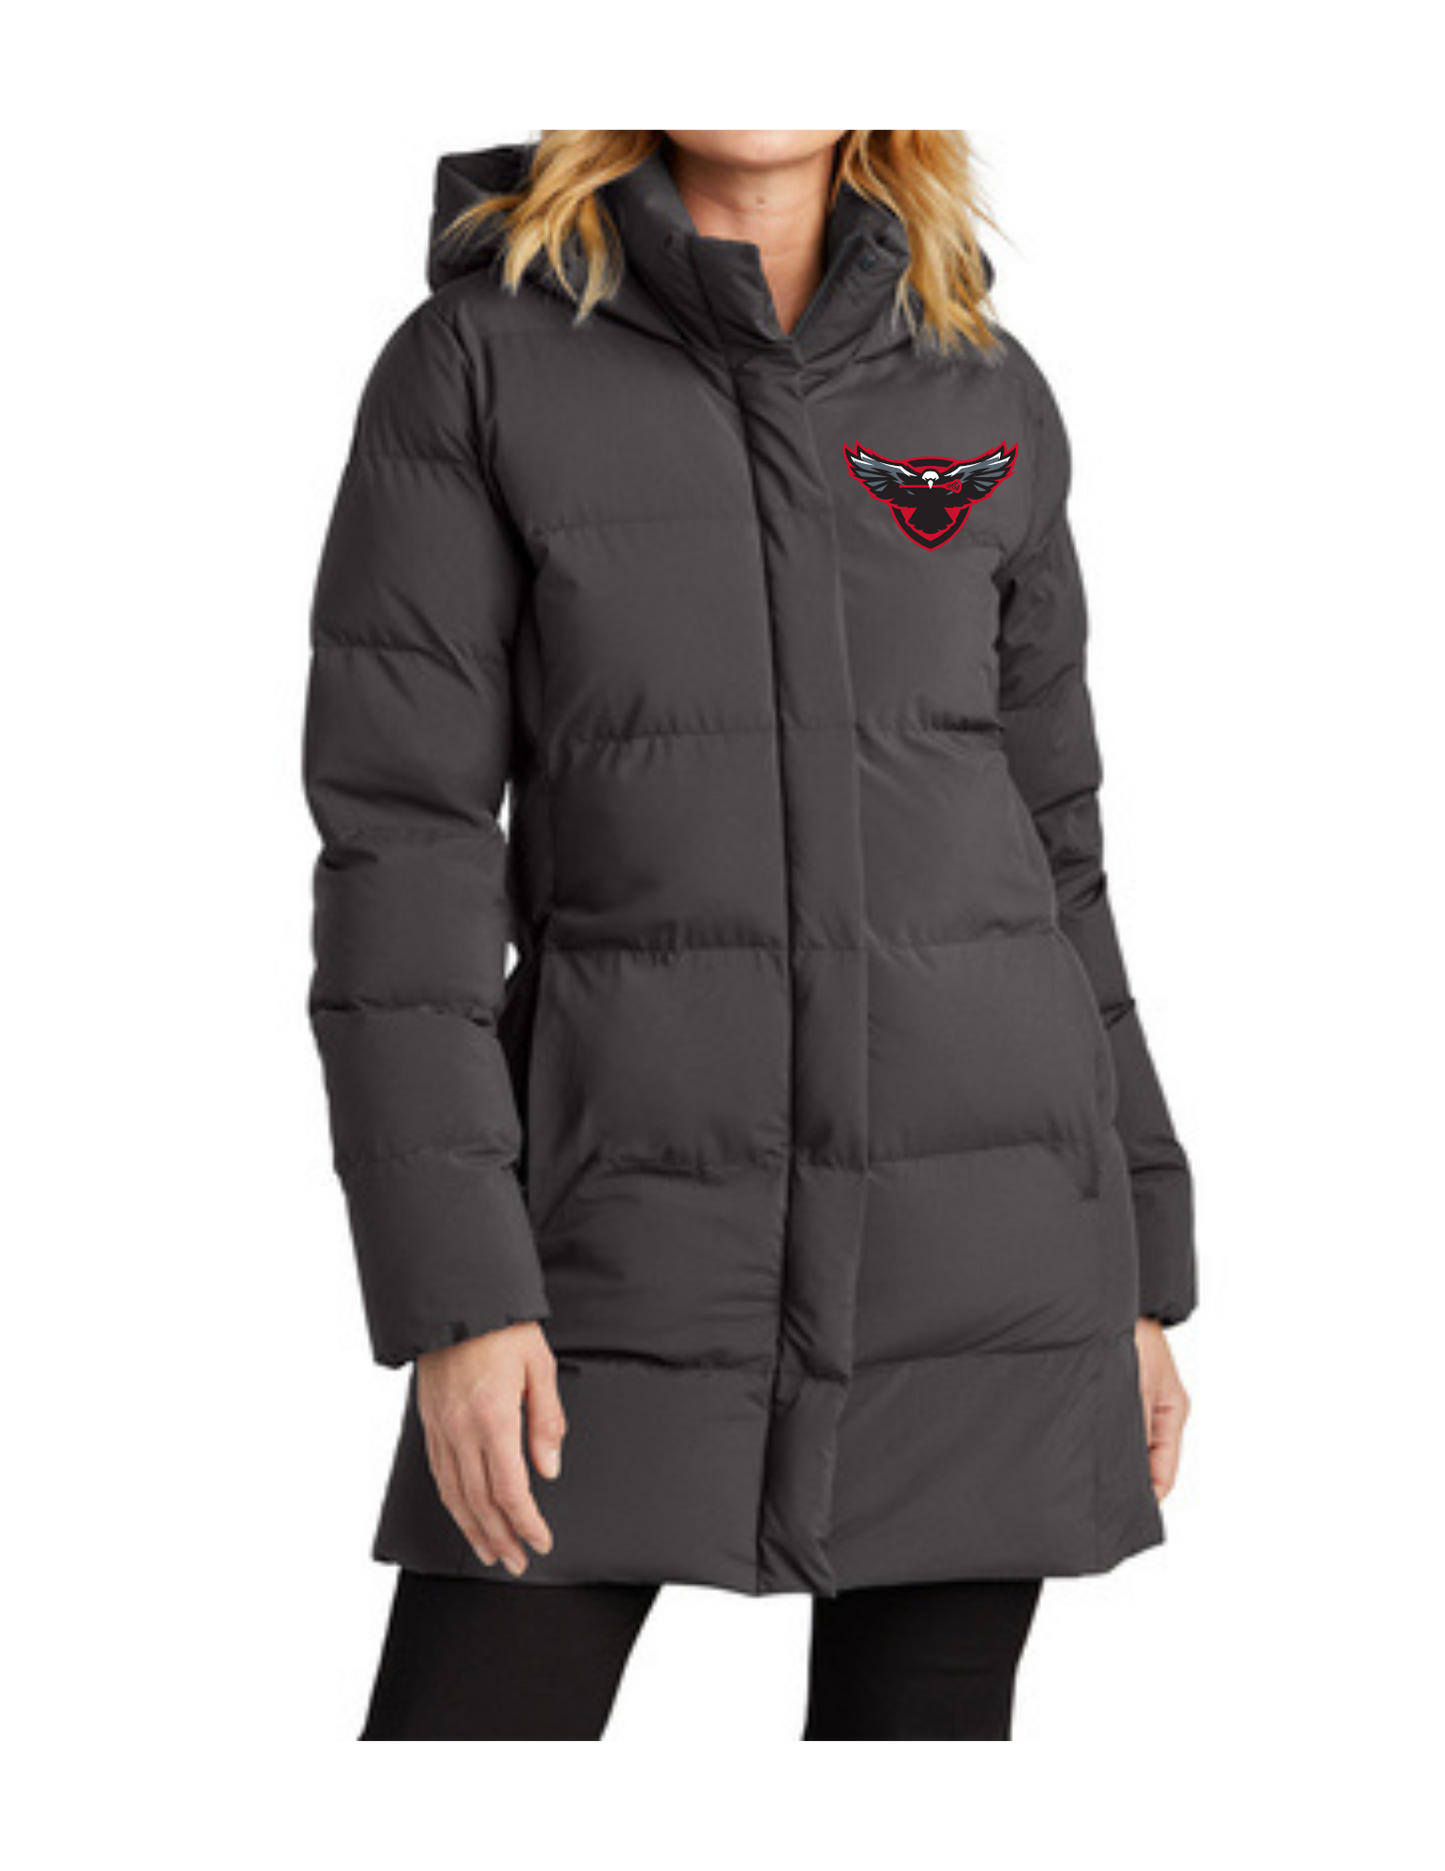 North Tapps Mercer and Mettle Women's Parka Jacket